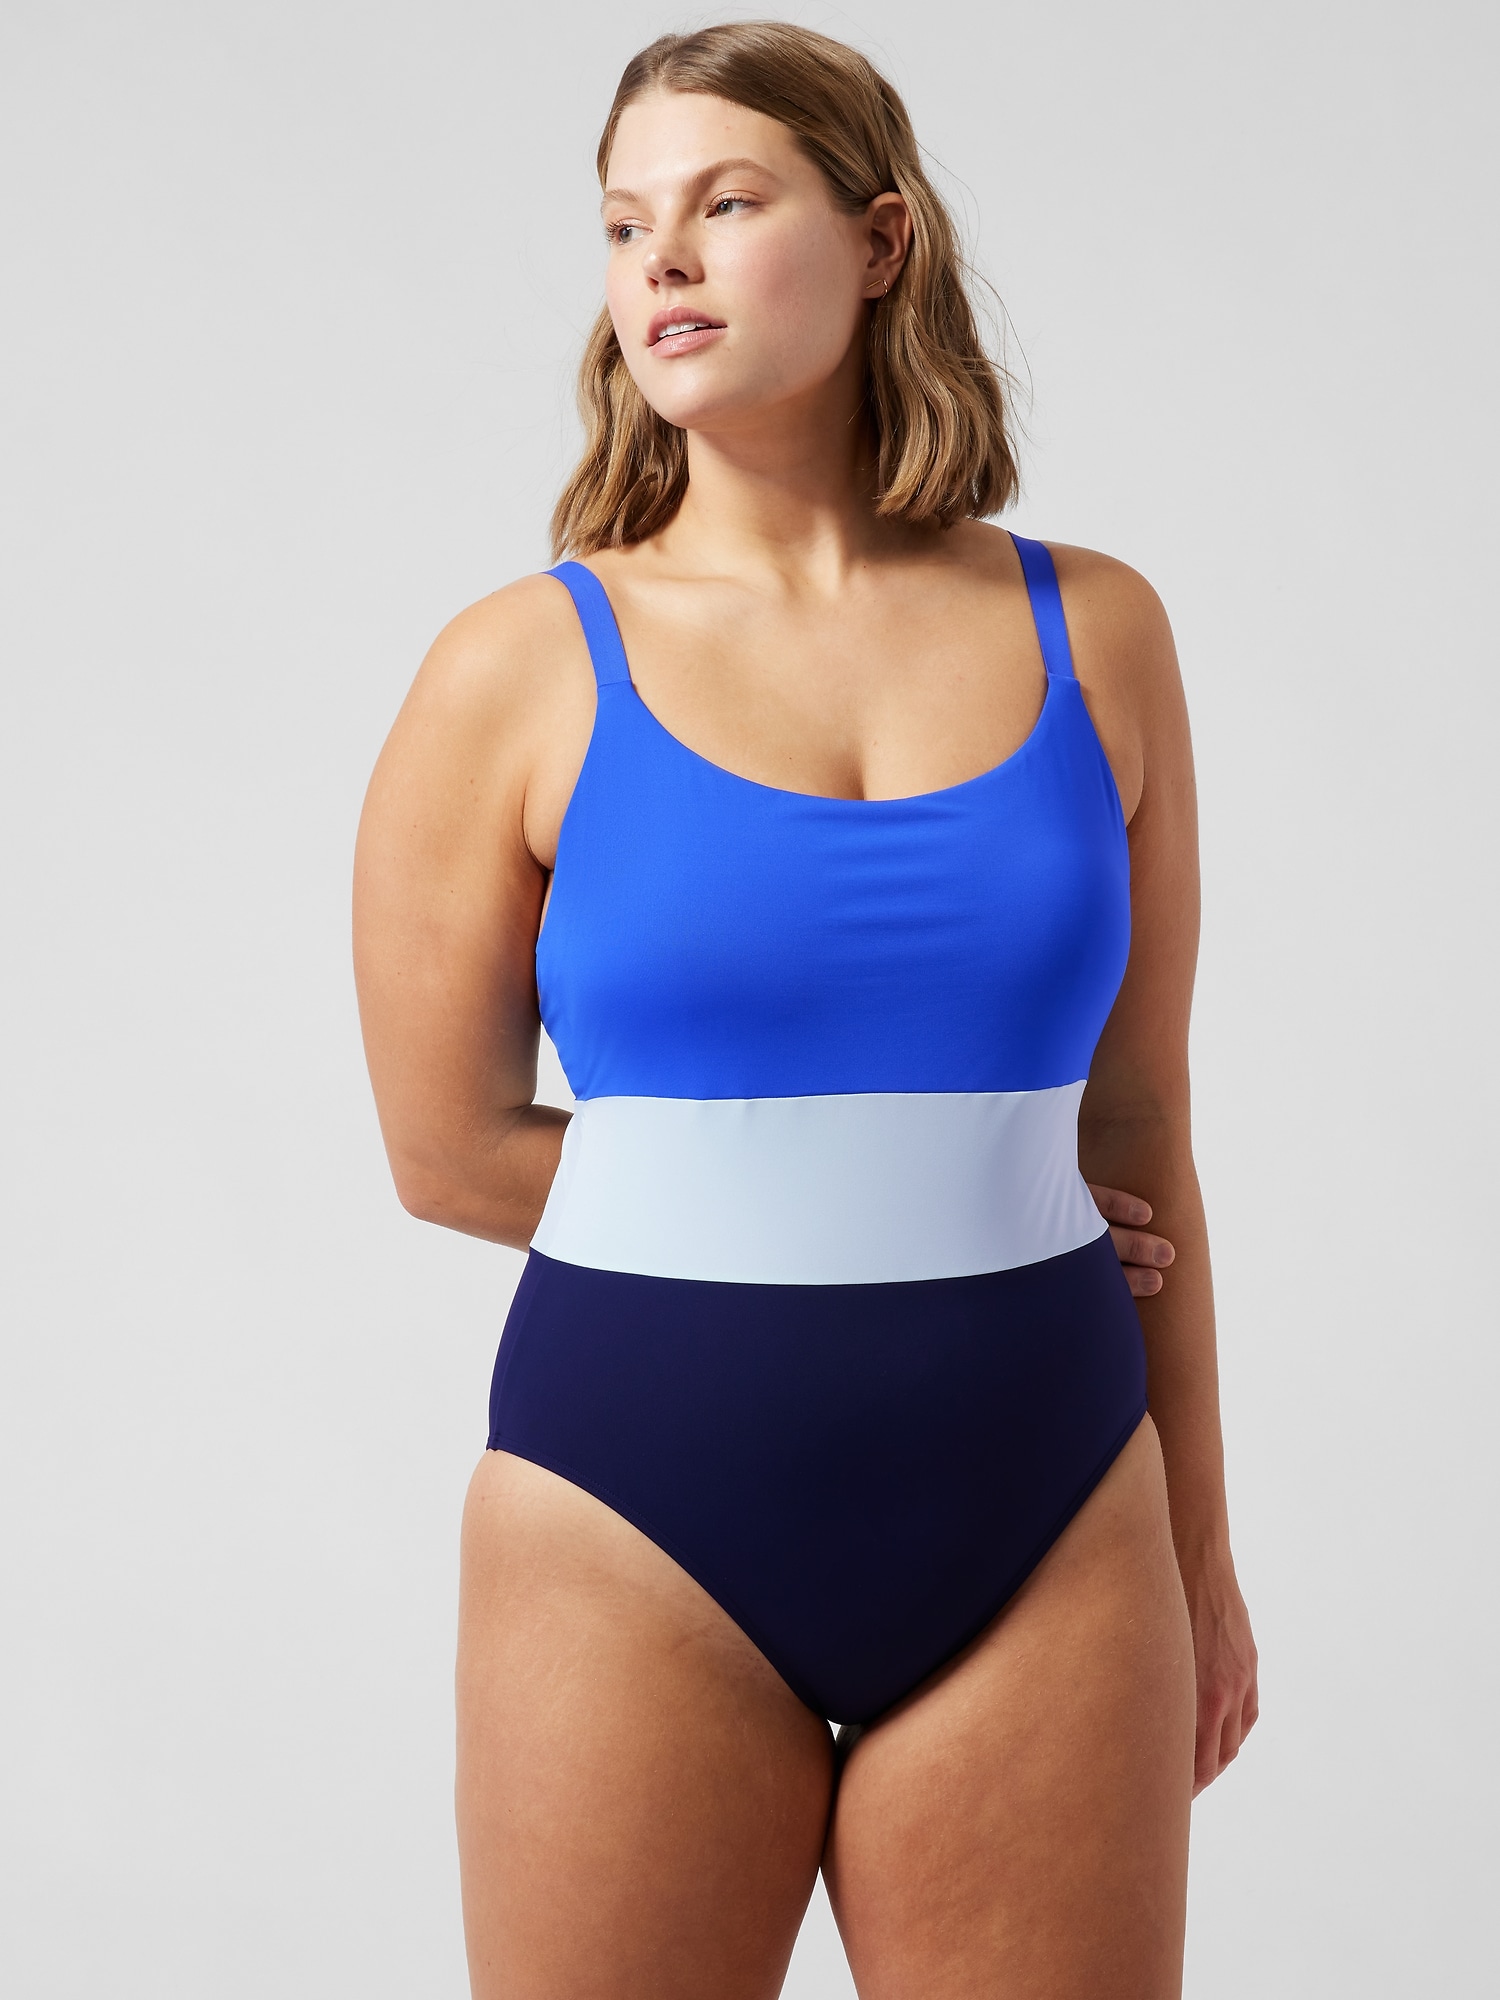 Athleta Swimsuit Womens 36D Chevron High Leg One Piece Beach Pool Vacation  Size undefined - $44 - From Sigi